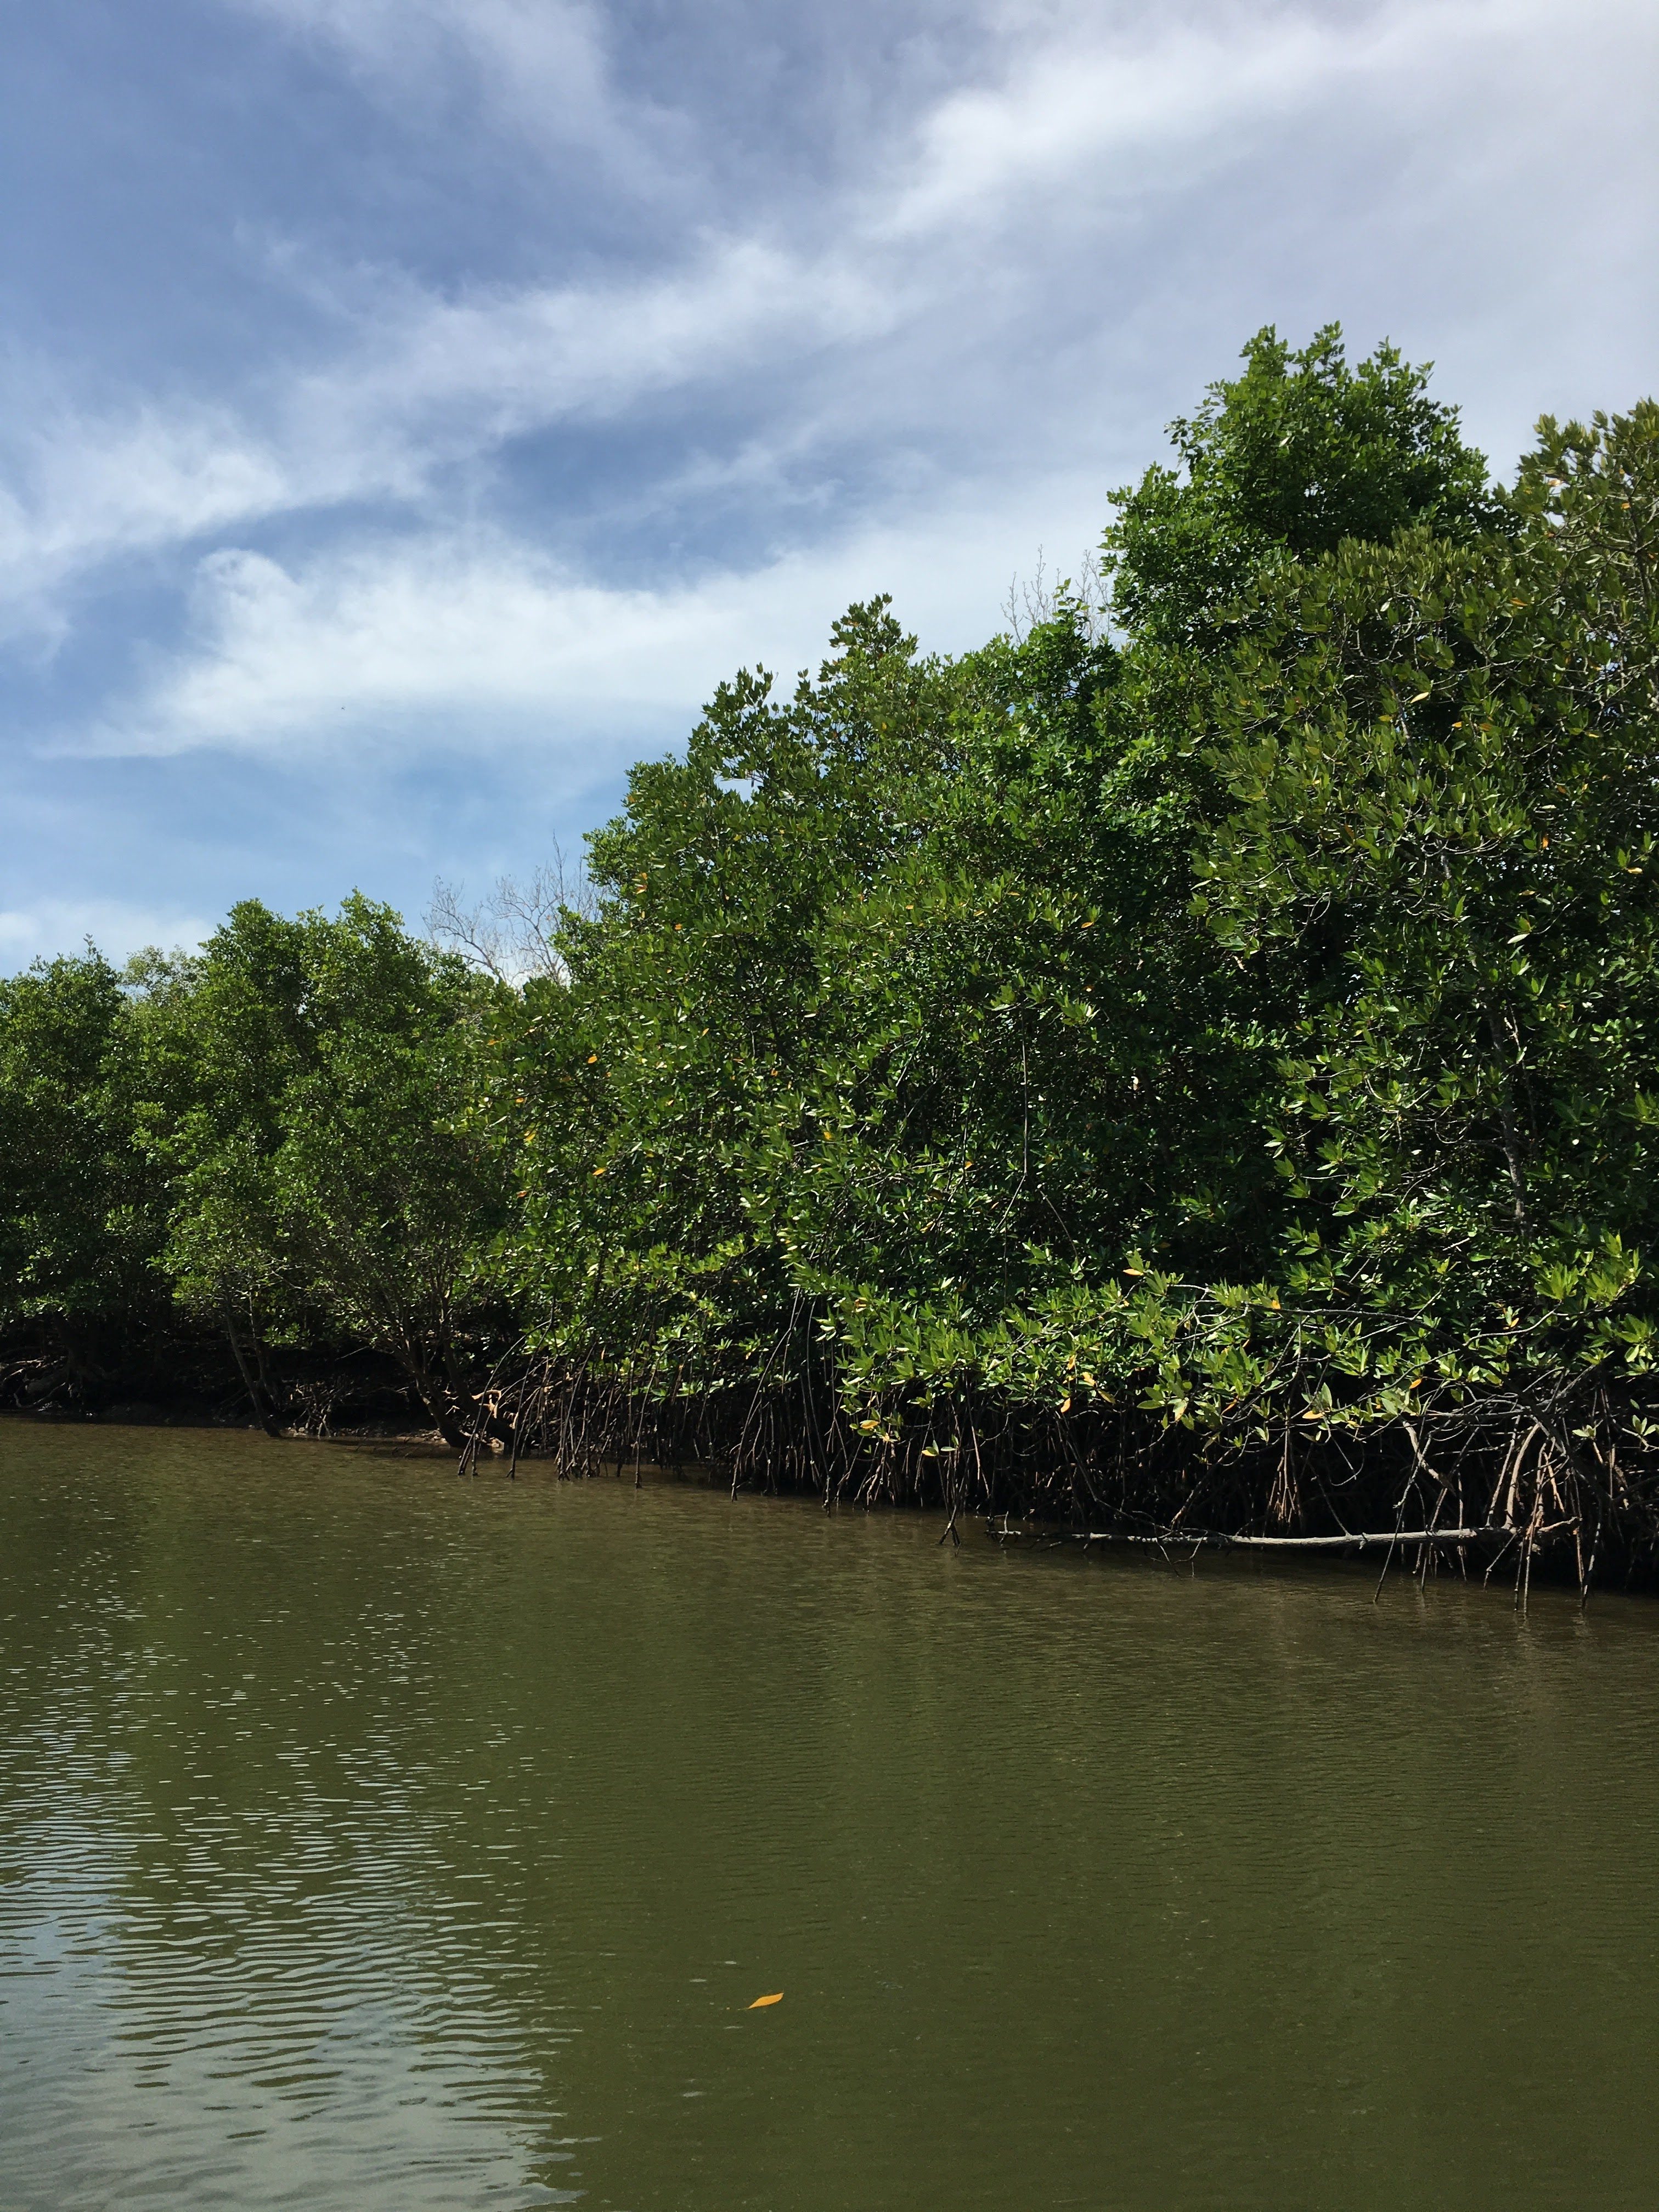 Regulating and cultural services of mangroves